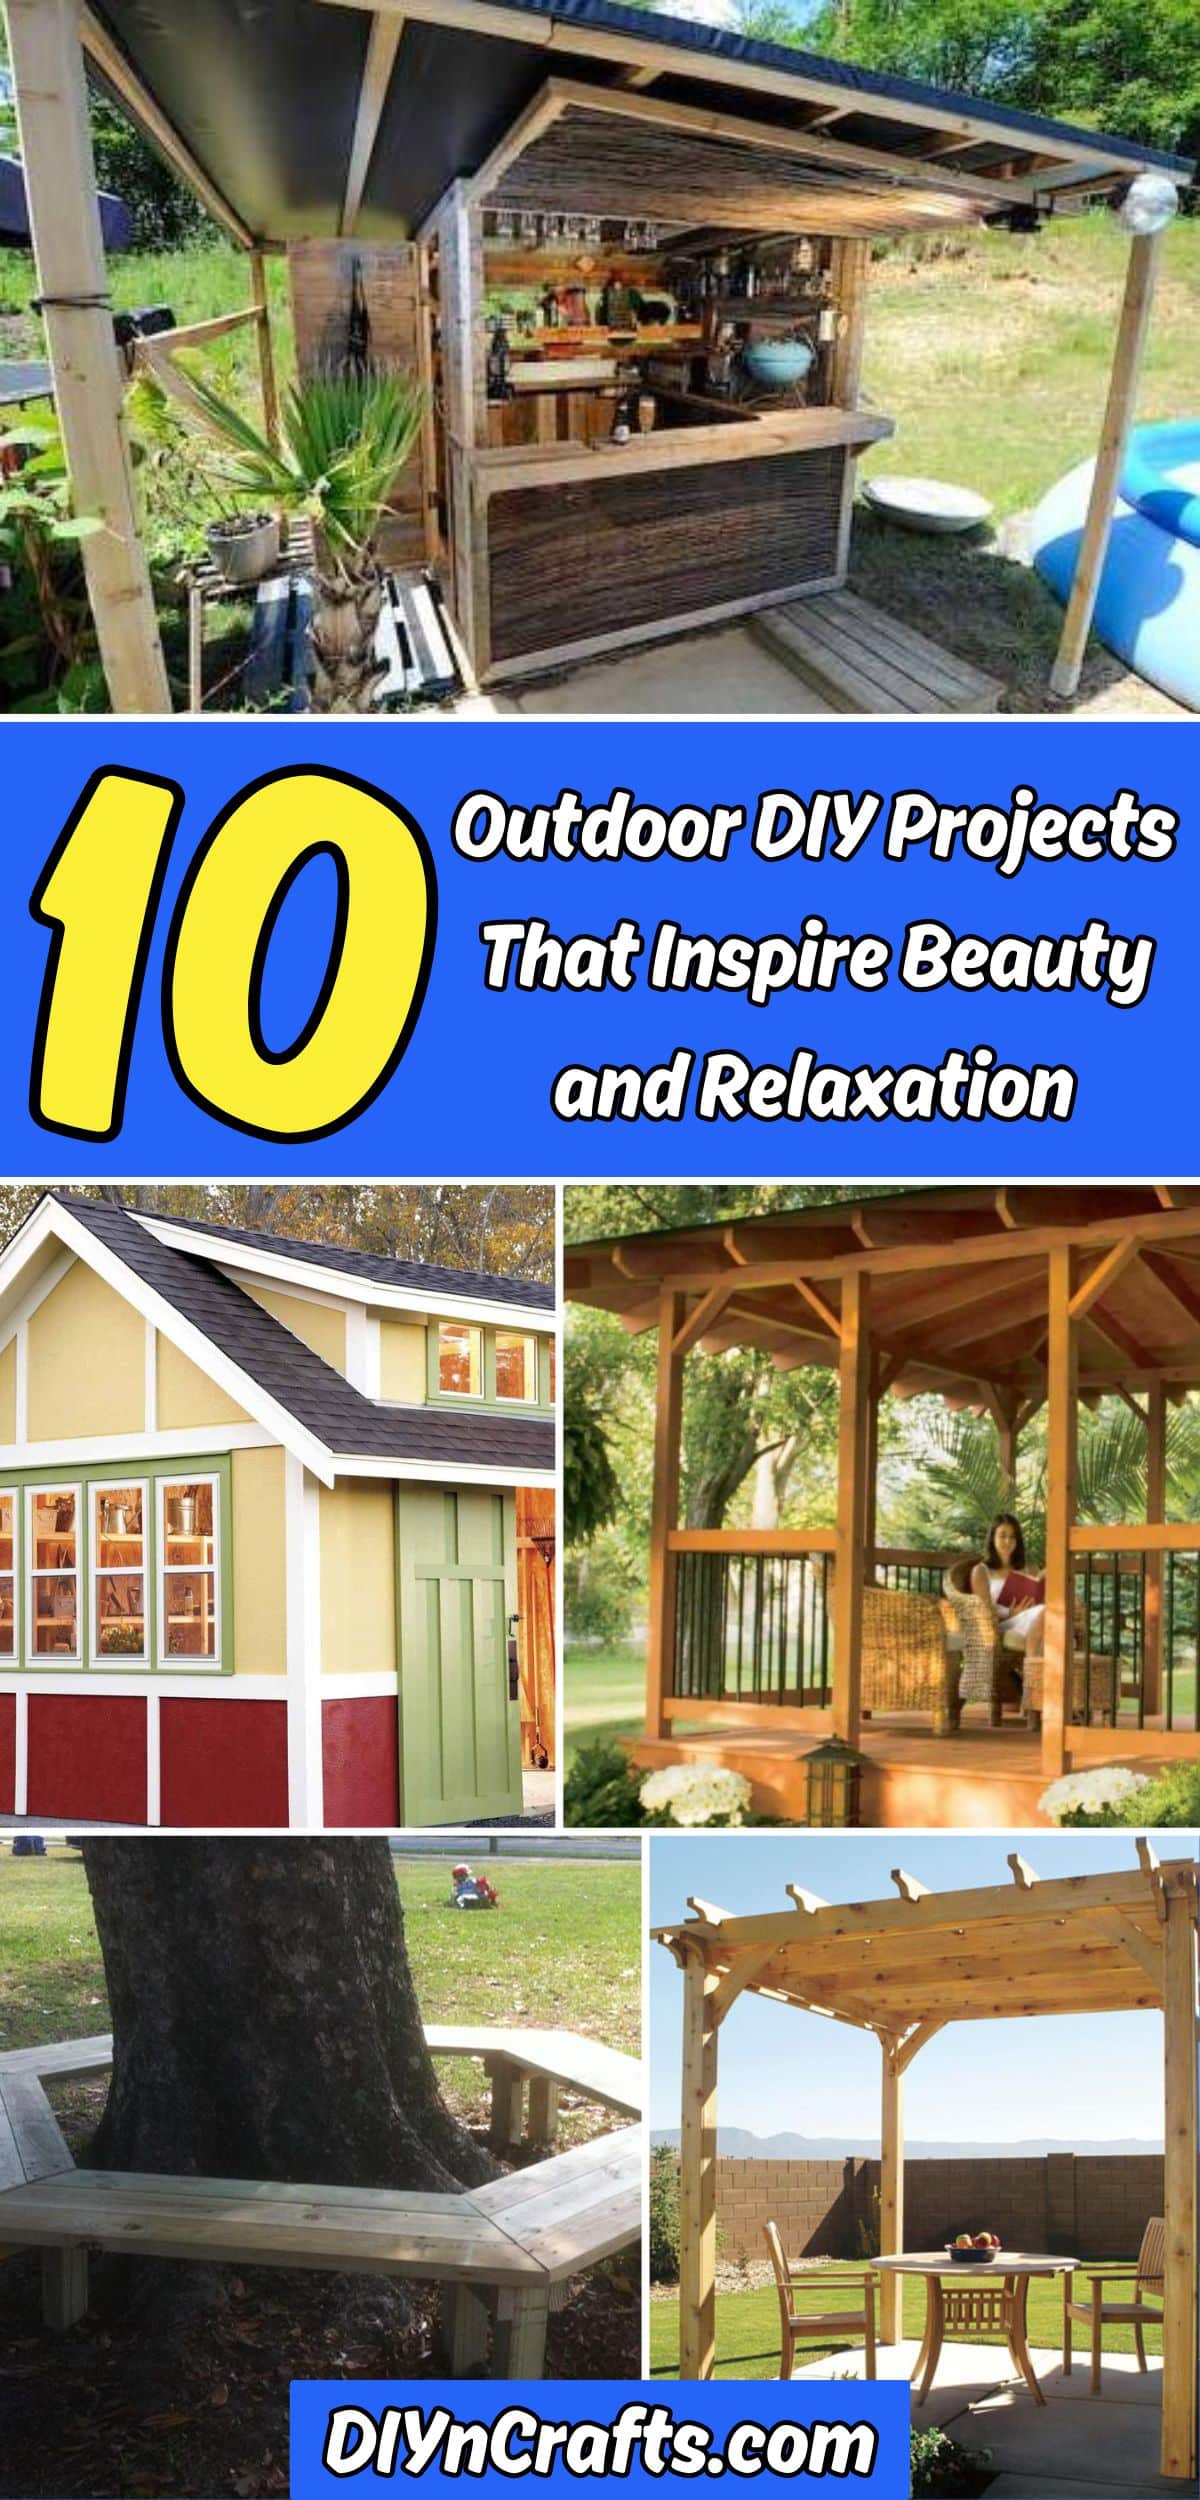 10 Outdoor DIY Projects That Inspire Beauty and Relaxation collage.